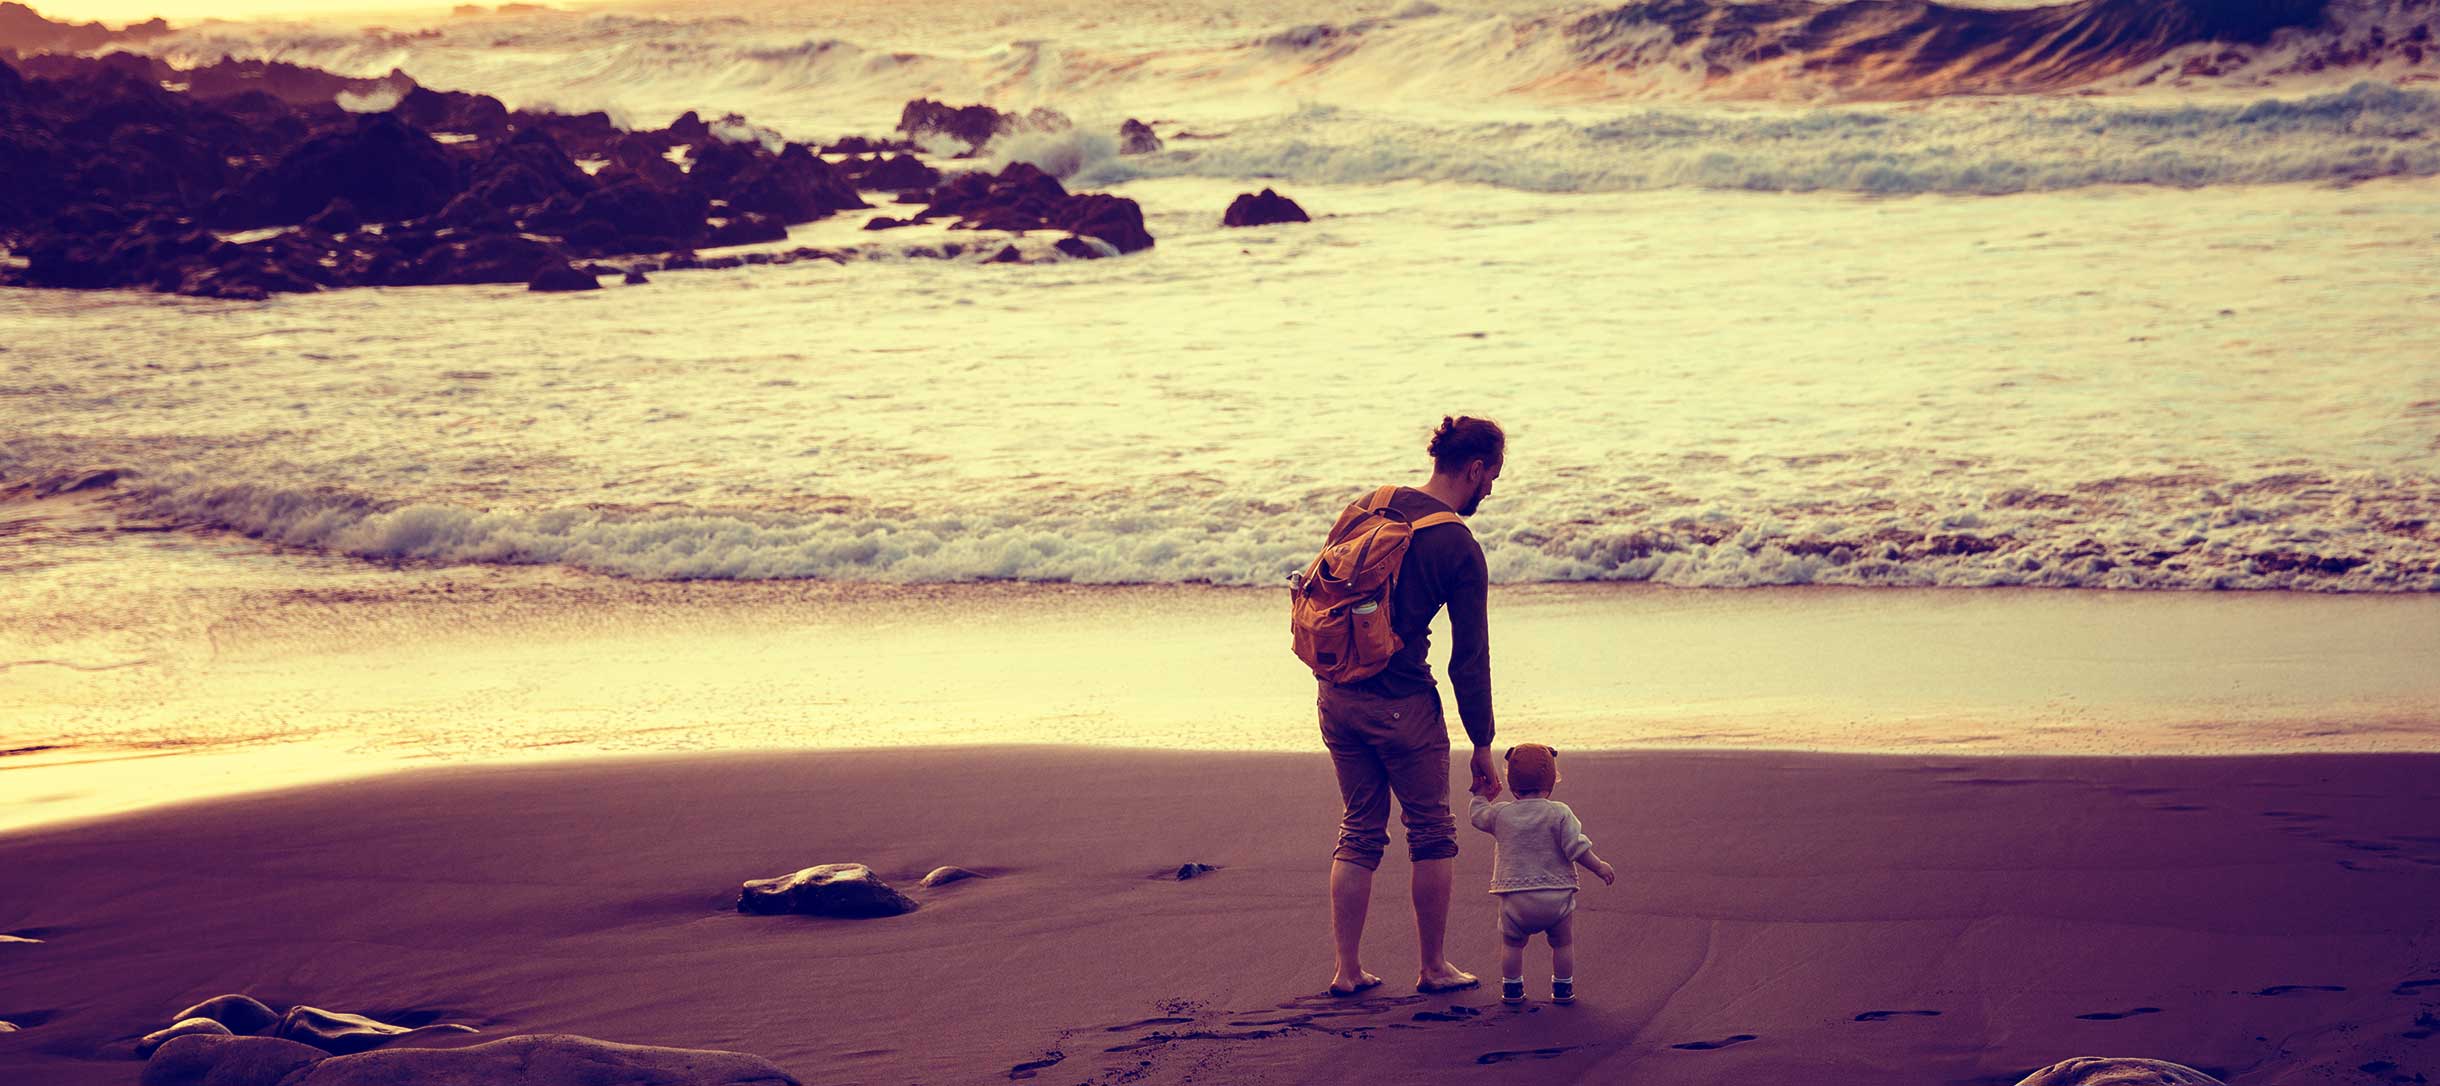 Milk x Whiskey - Sunset on the beach. A father and their child on the shore while the father is showing their baby a new discovery.